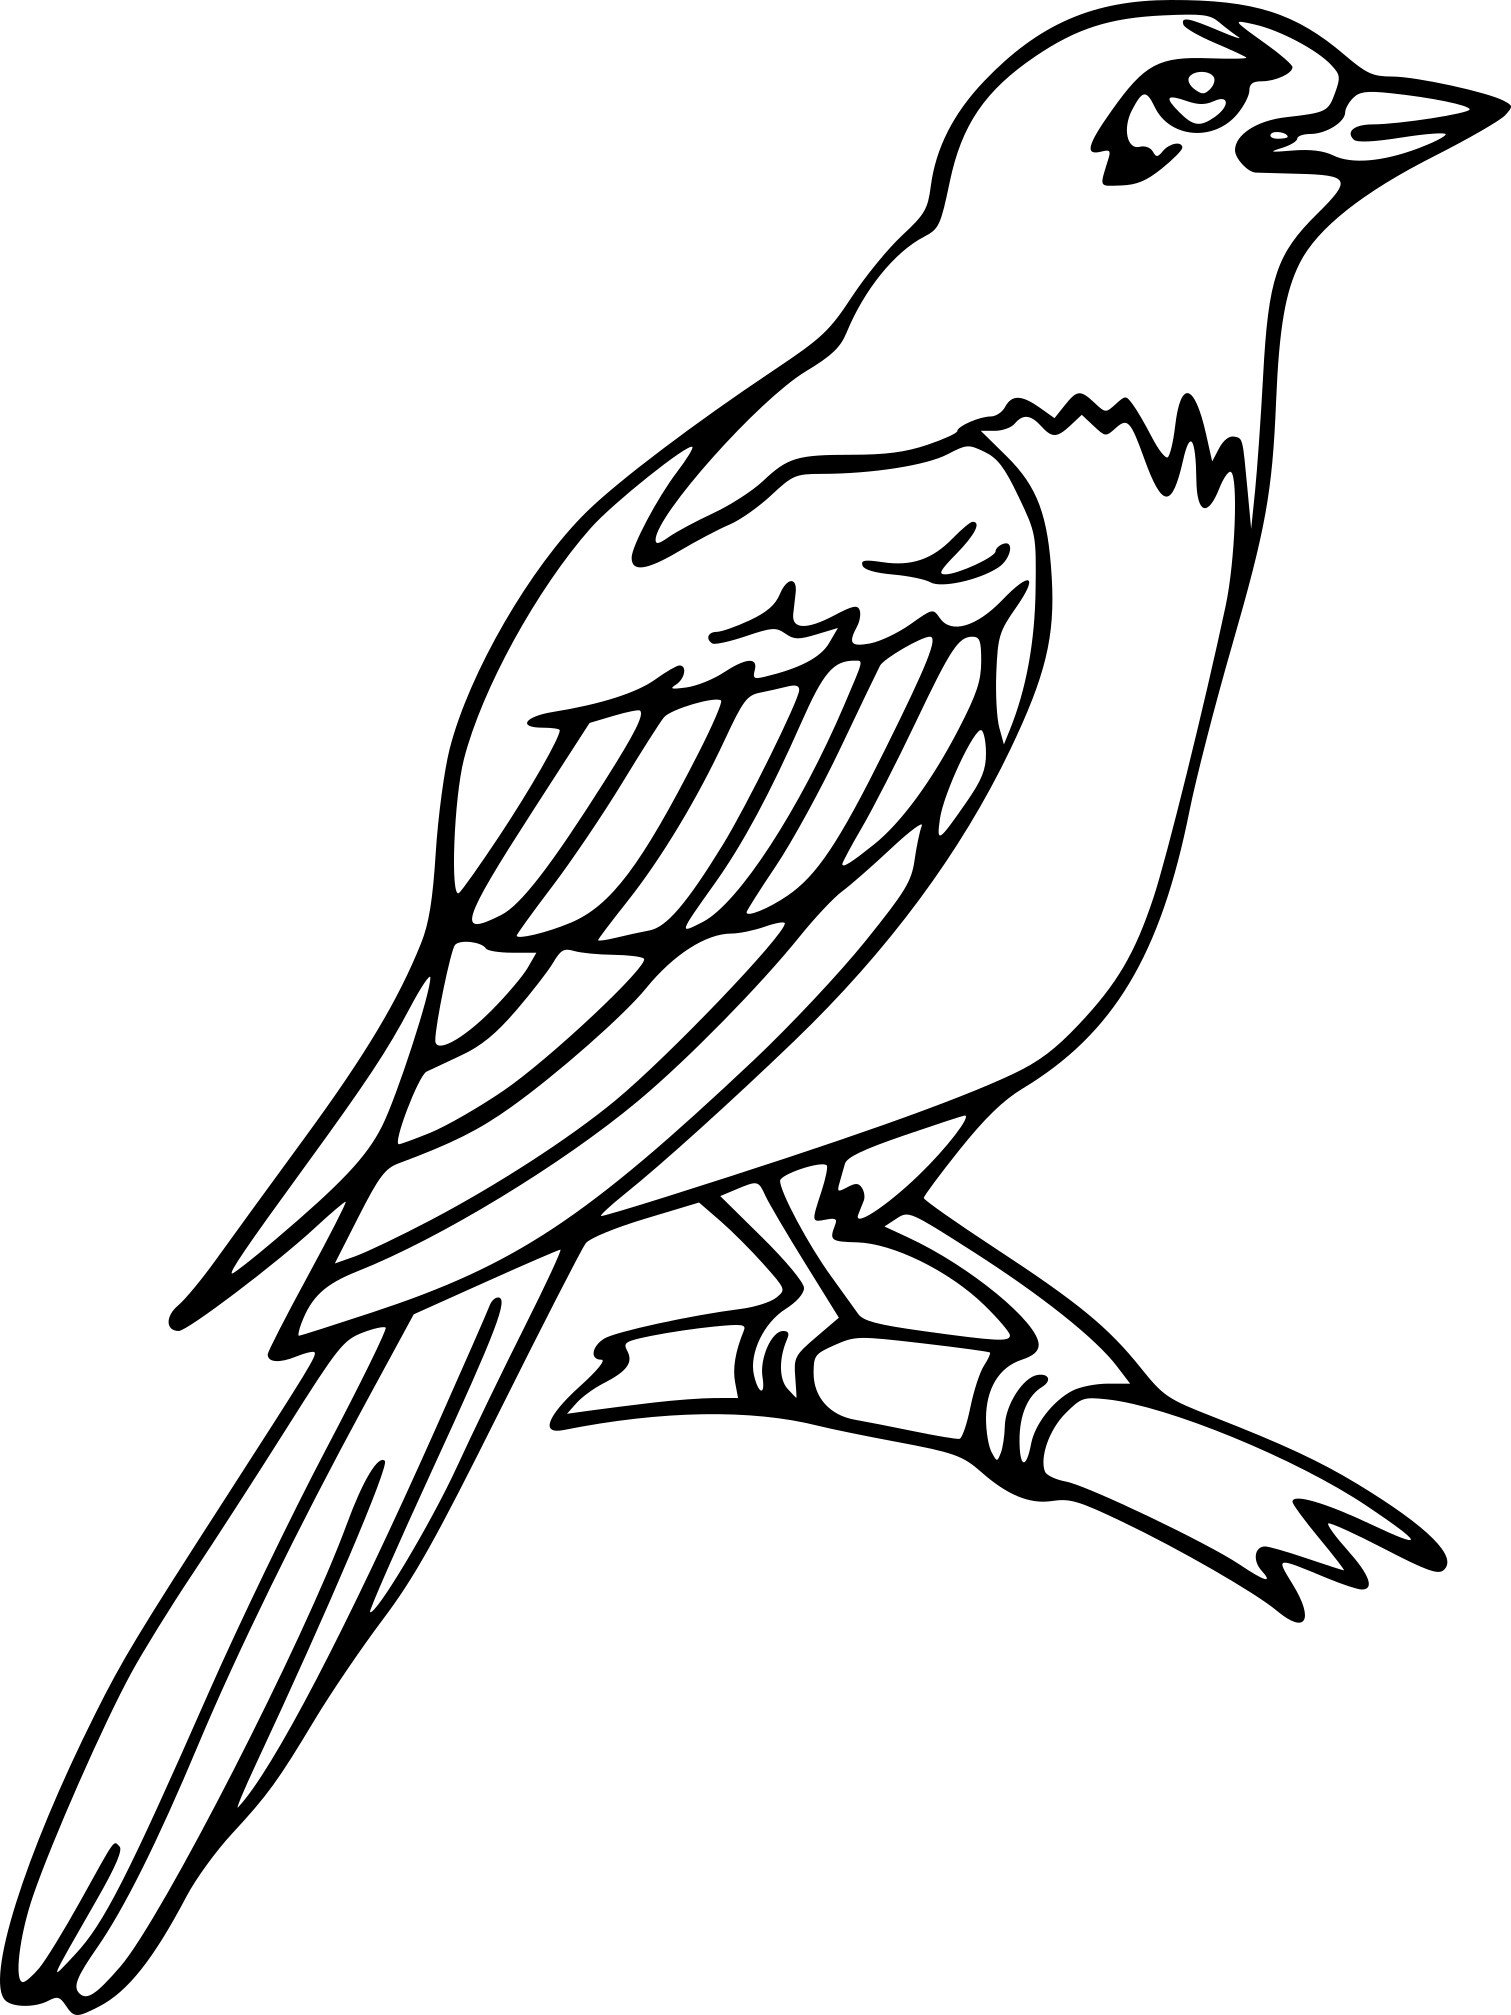 Magpie Coloring Pages Printable for Free Download